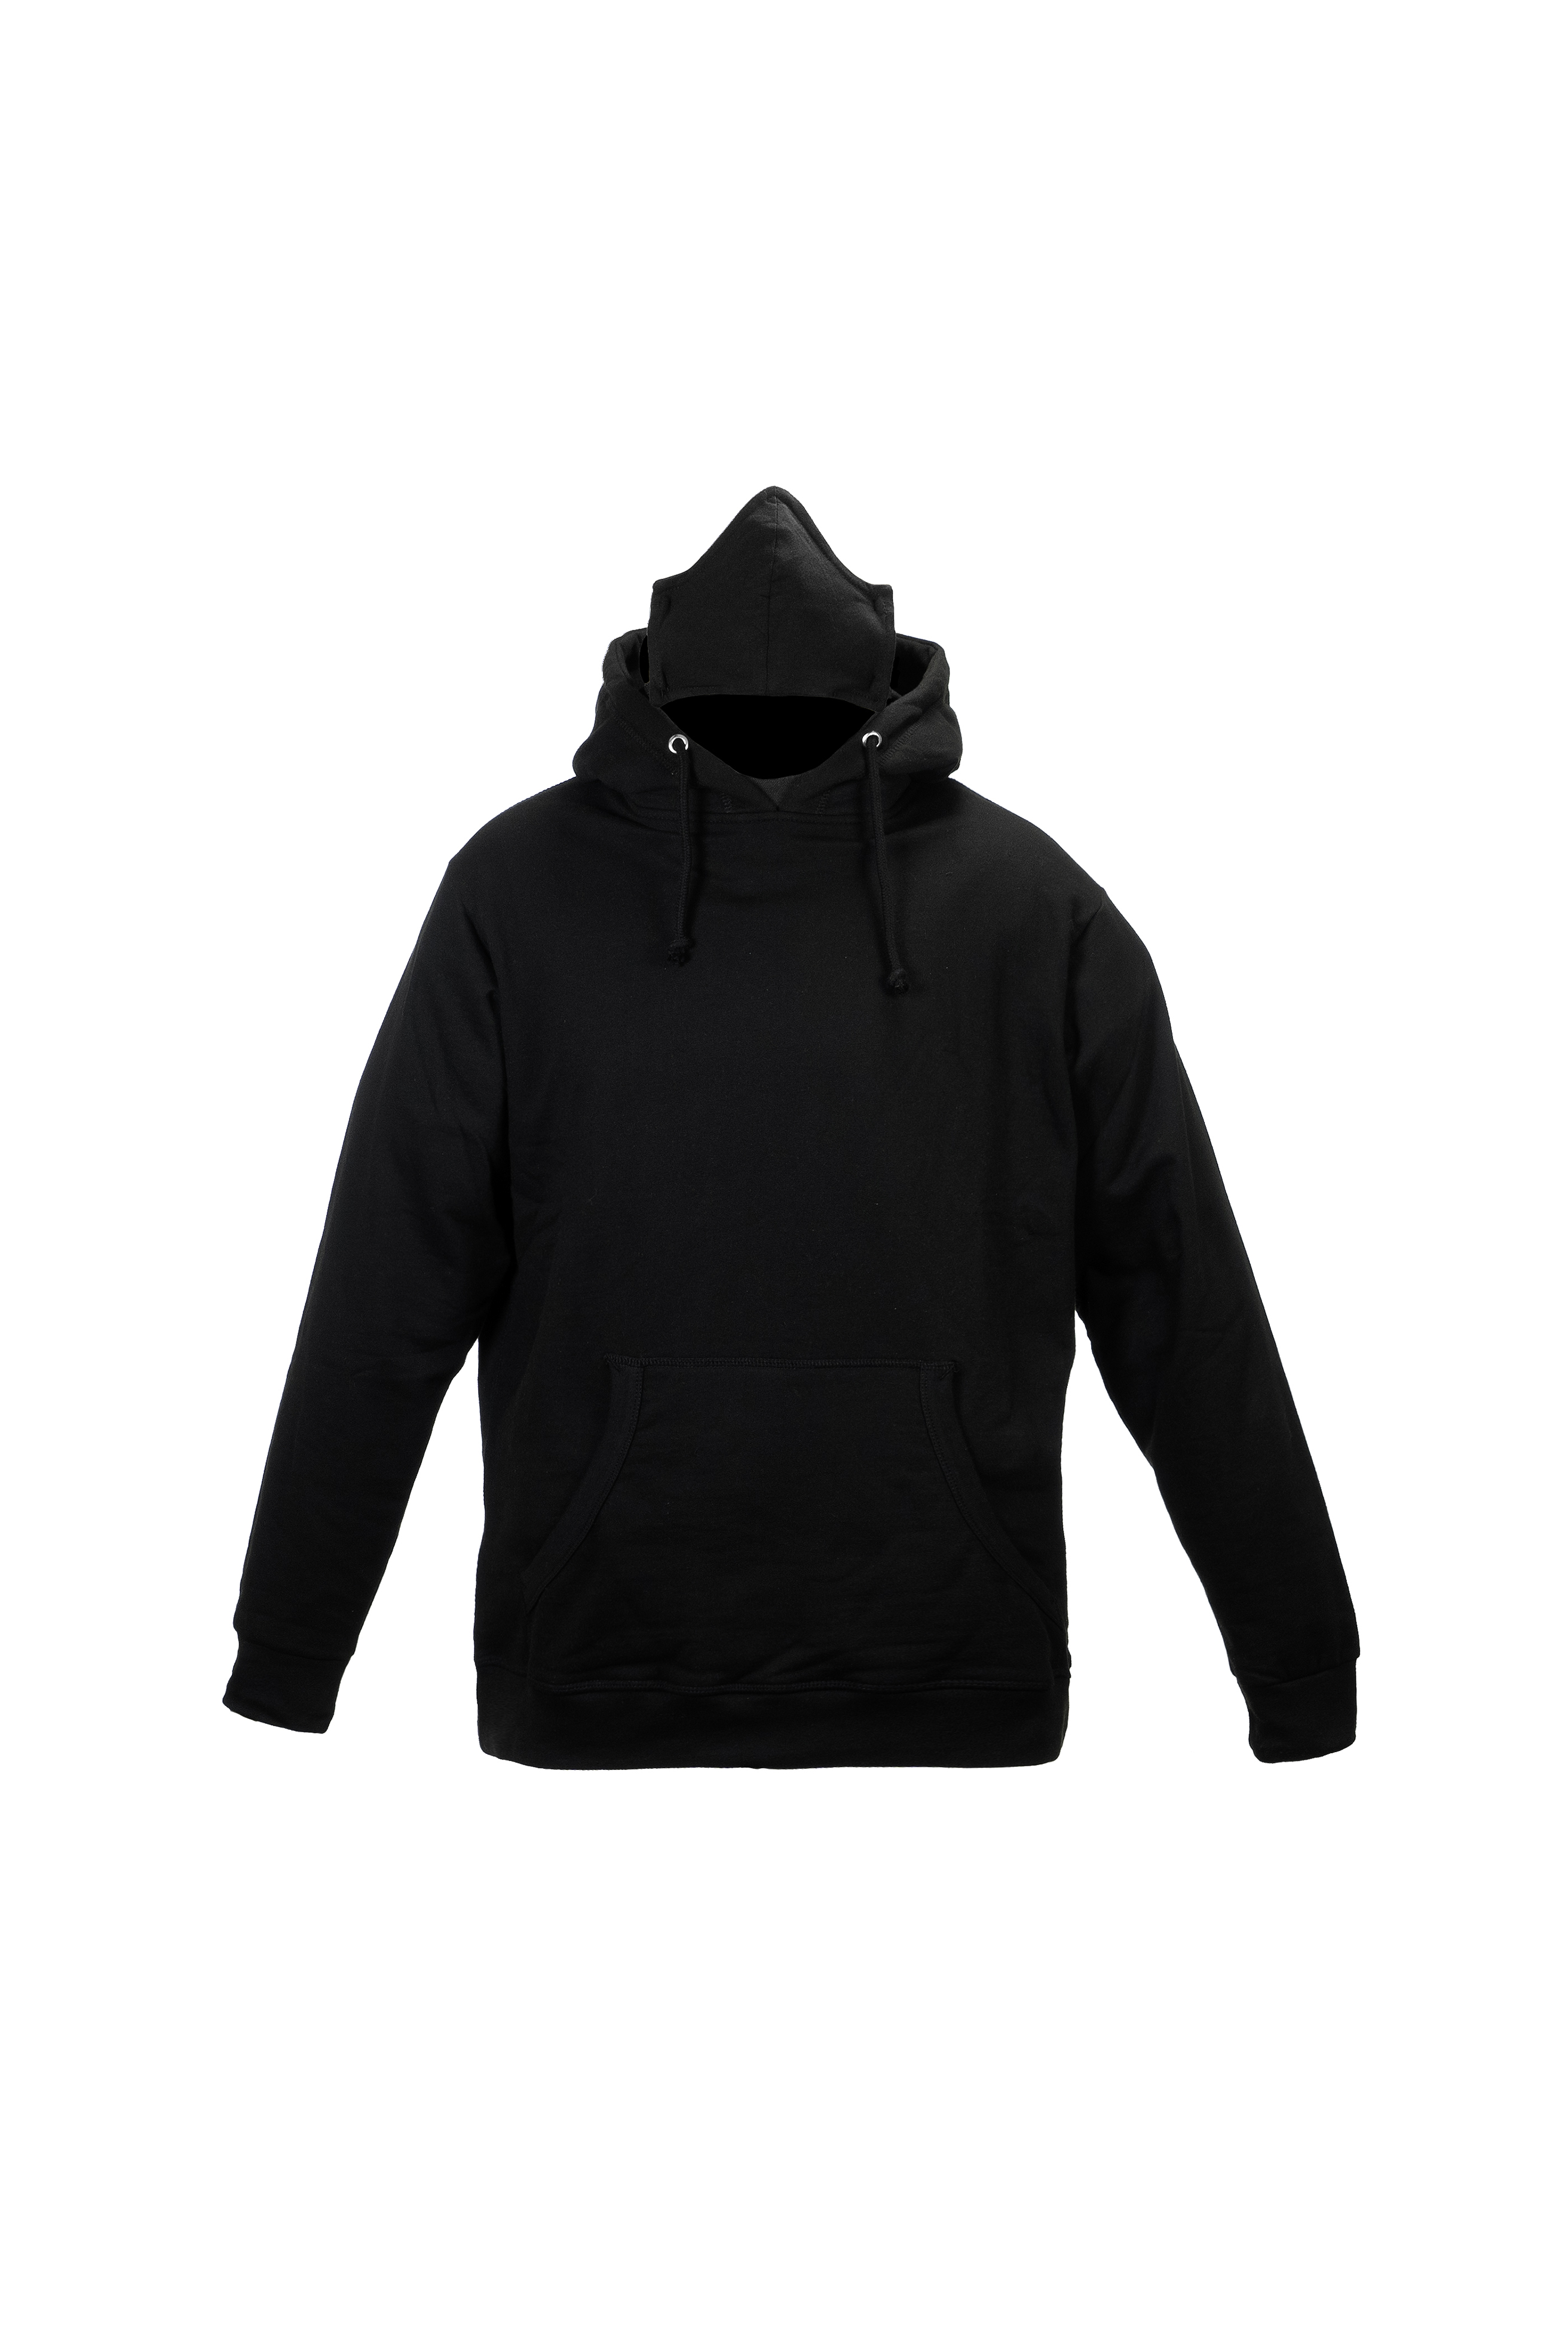 HS apparel - THE ALL SET PULLOVER HOODIE